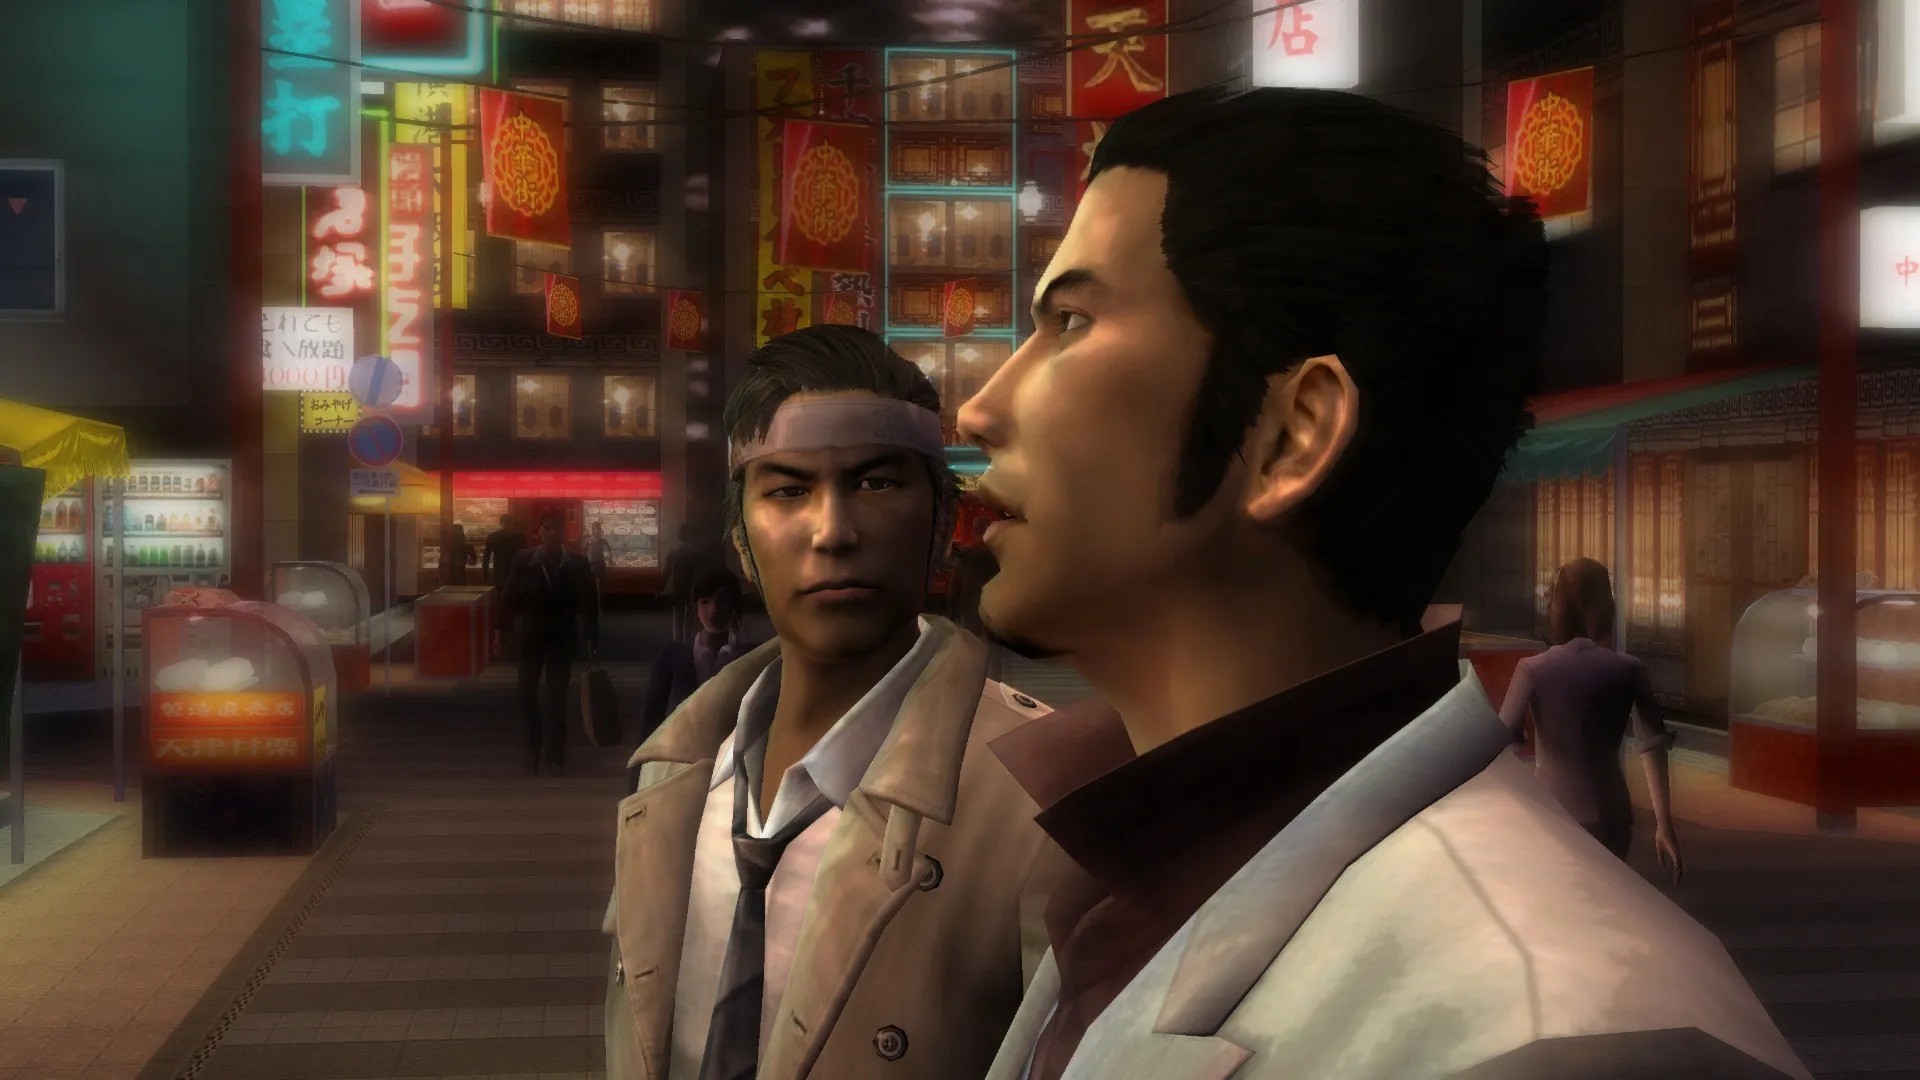 Kiwami remakes are great, no doubt, but what about the originals